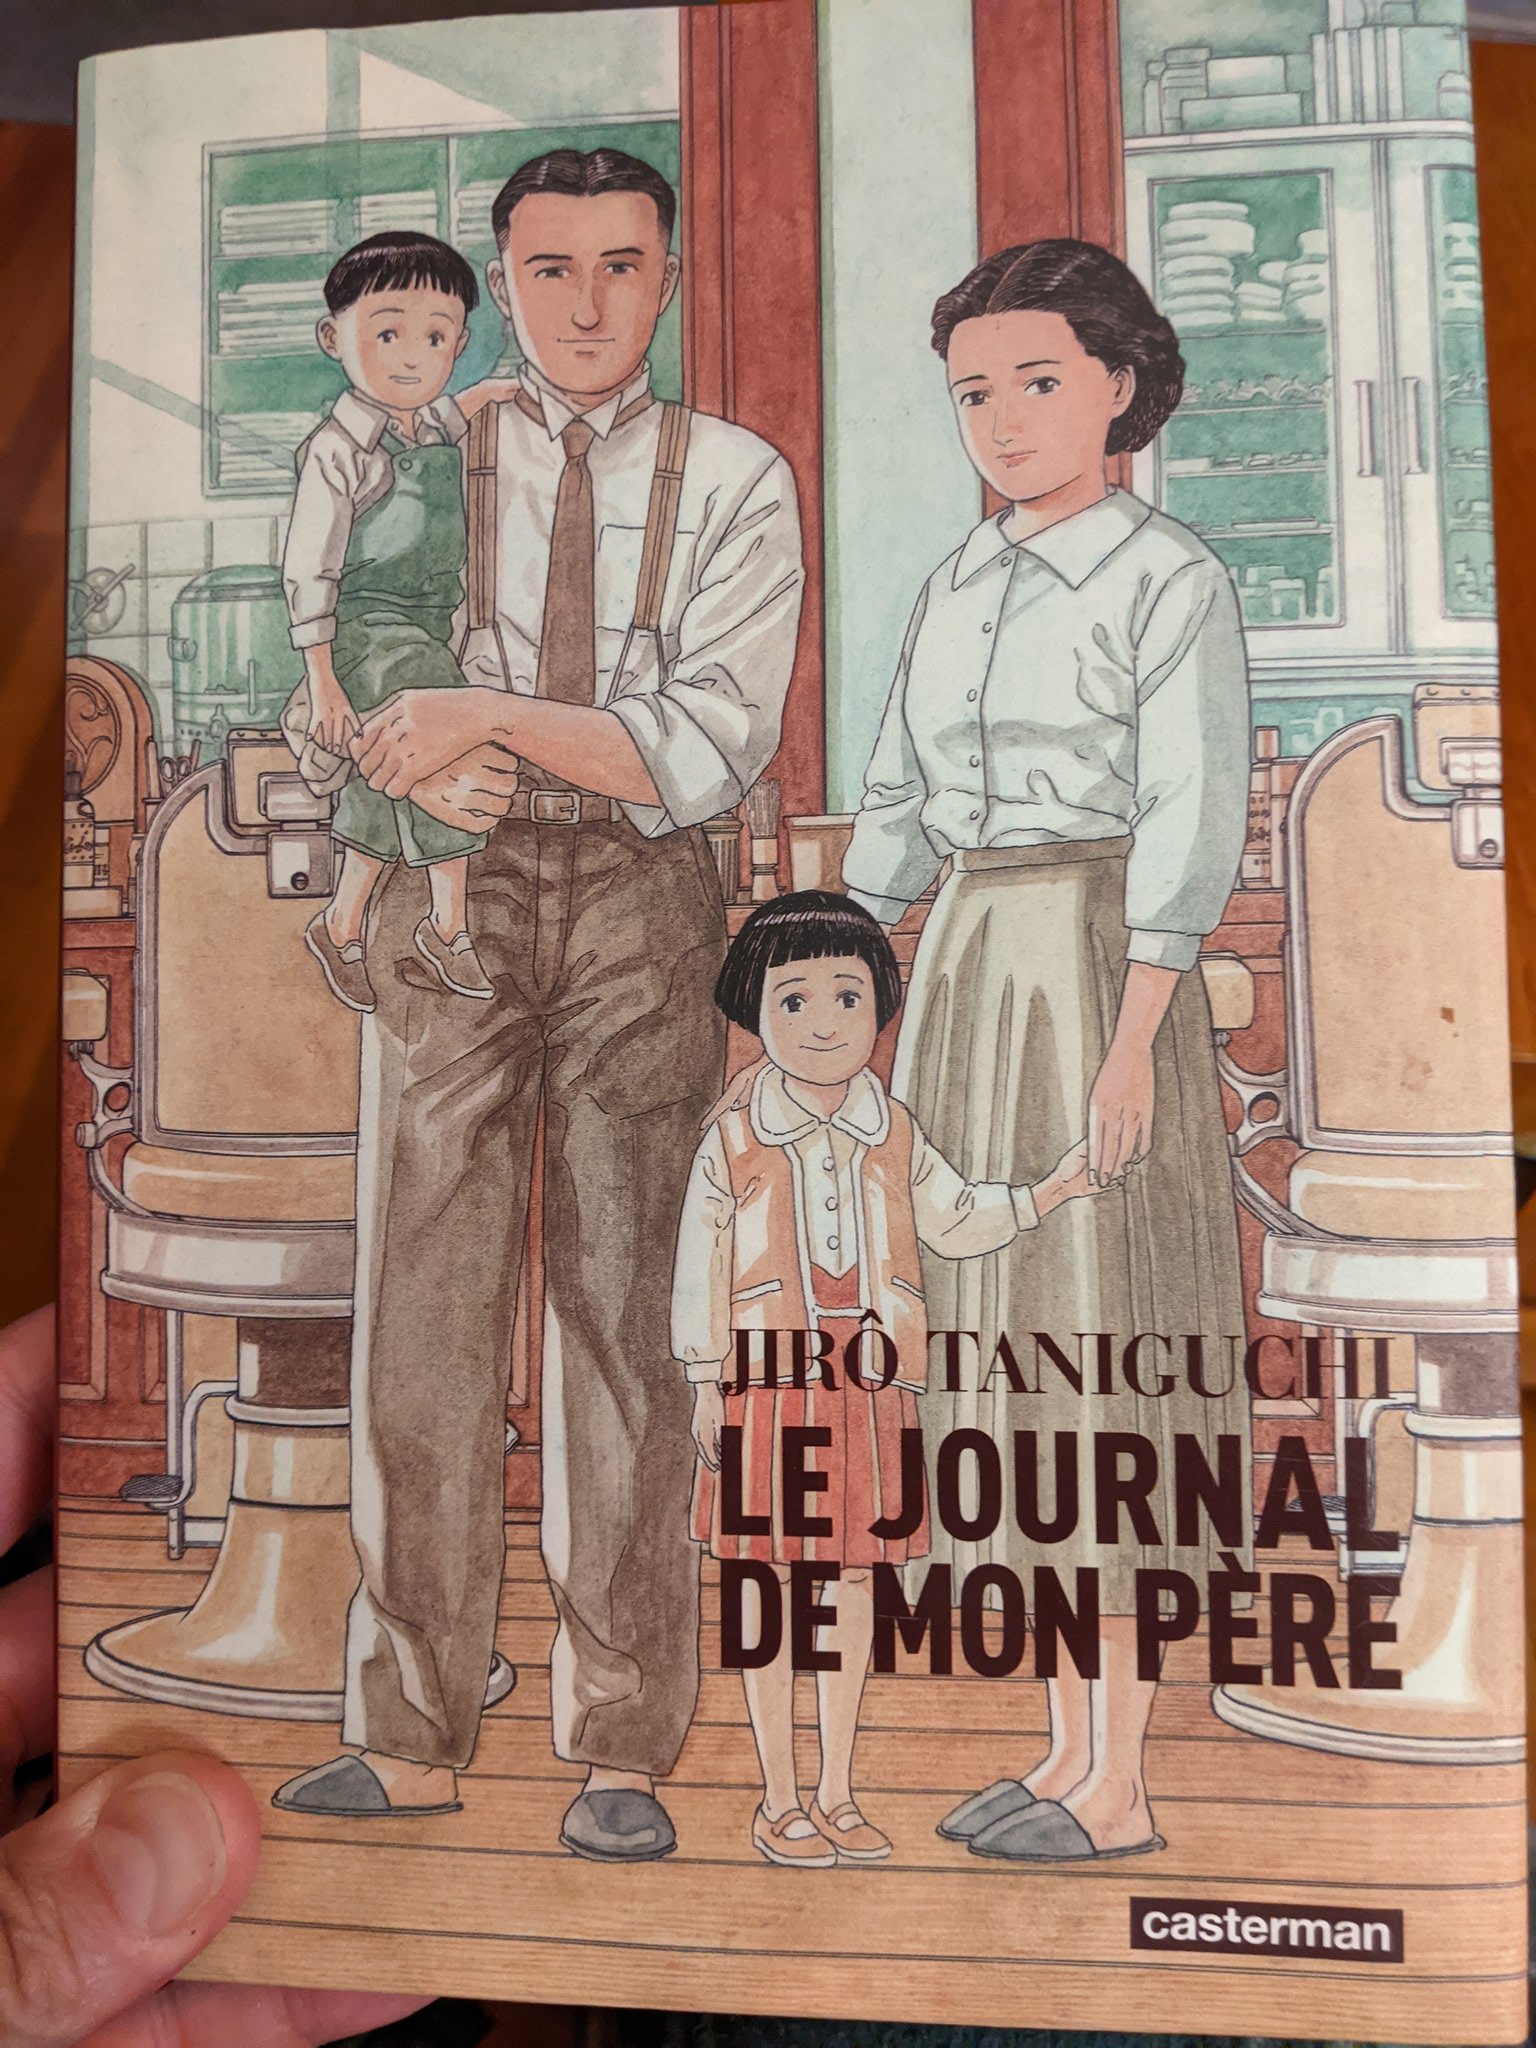 Deb Aoki on Twitter: "@ben_towle I picked up collection Jiro Taniguchi stories just about pets, mostly dogs on my last trip to France. Tear-jerkers them all! https://t.co/KNhuN0ZWdJ https://t.co/JOkTfZQccx" / Twitter